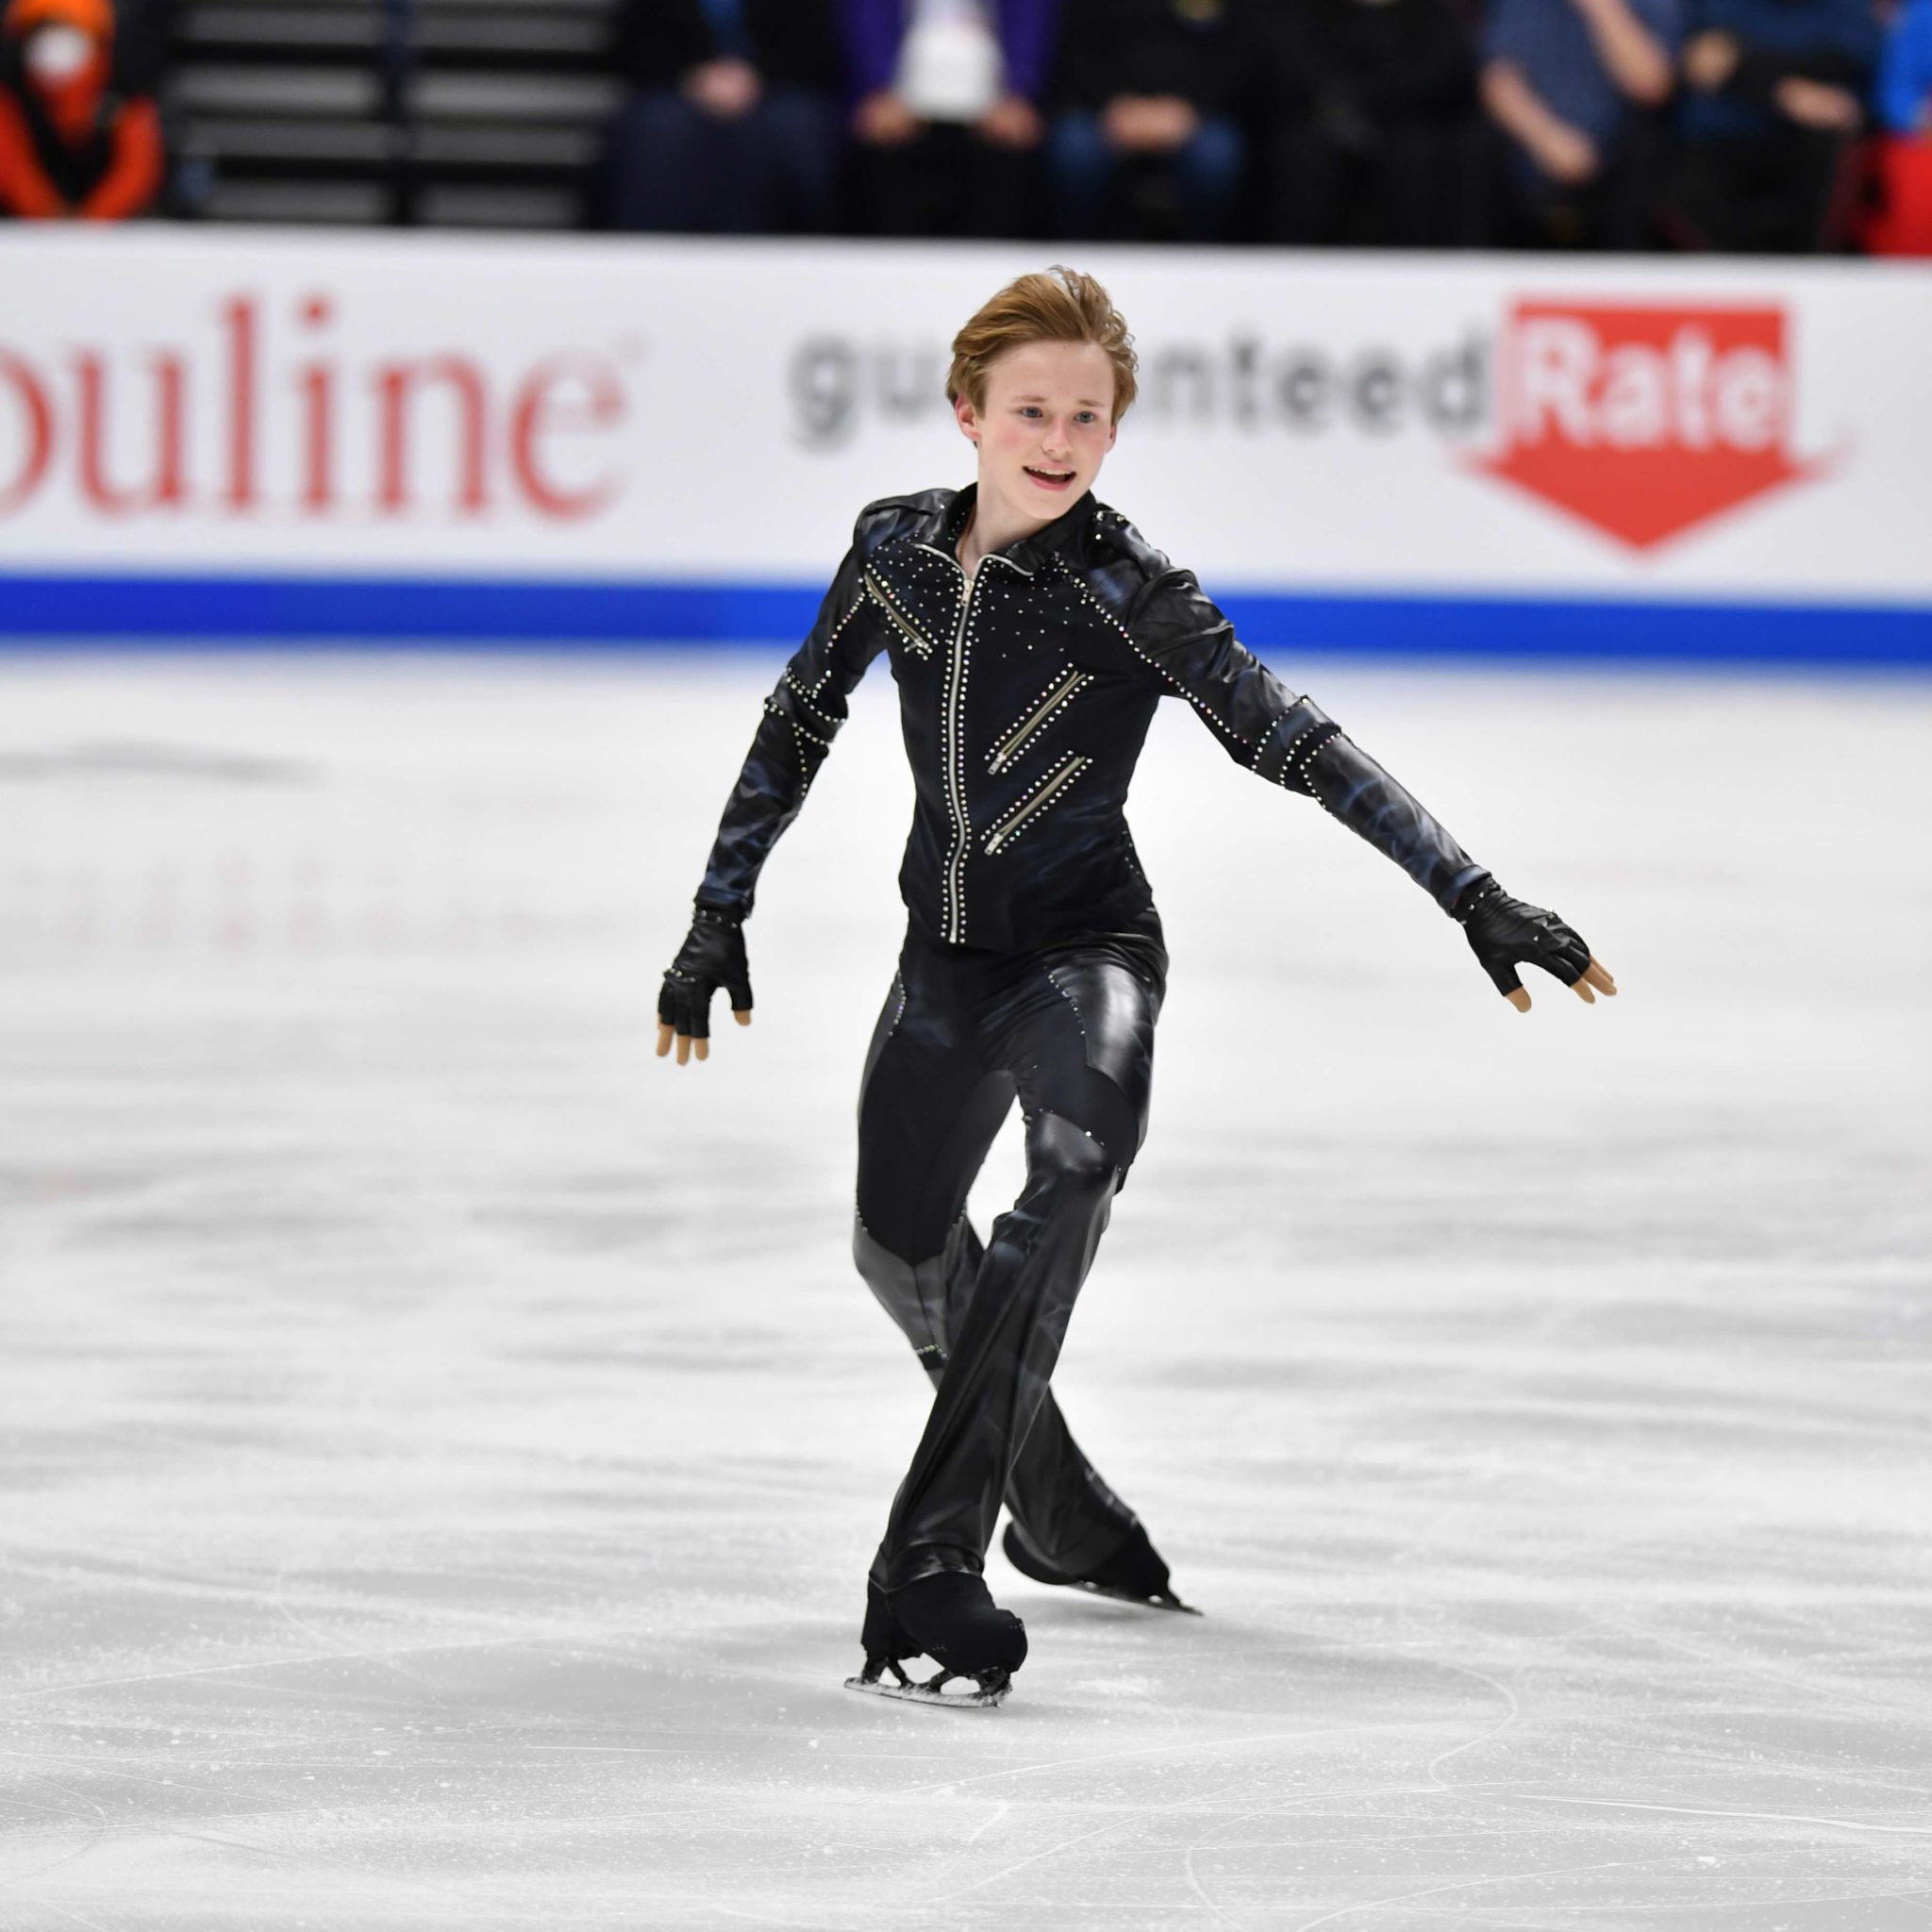 Ilia Malinin on How He Pulled Off the First Quad Axel